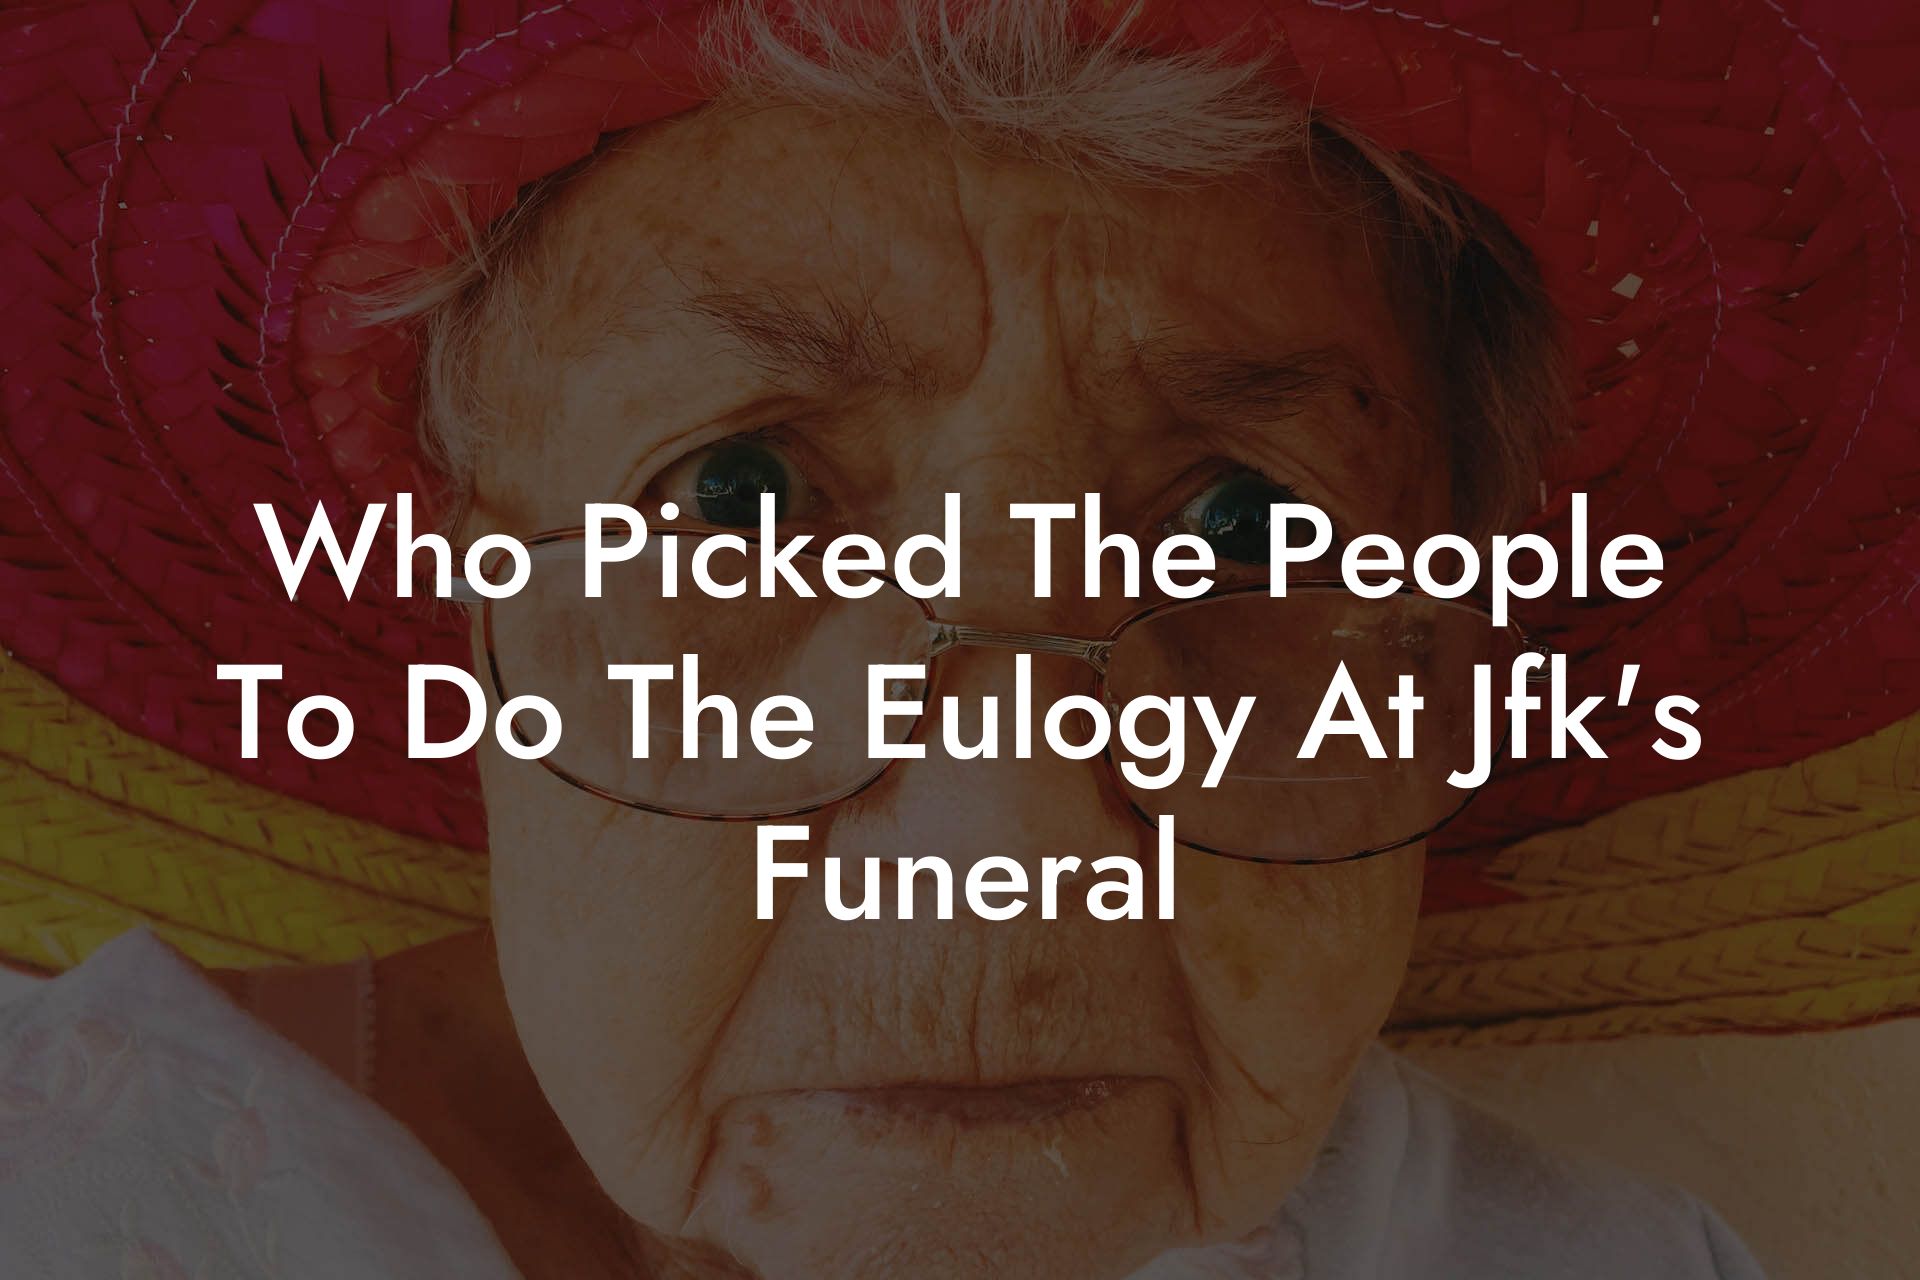 Who Picked The People To Do The Eulogy At Jfk's Funeral